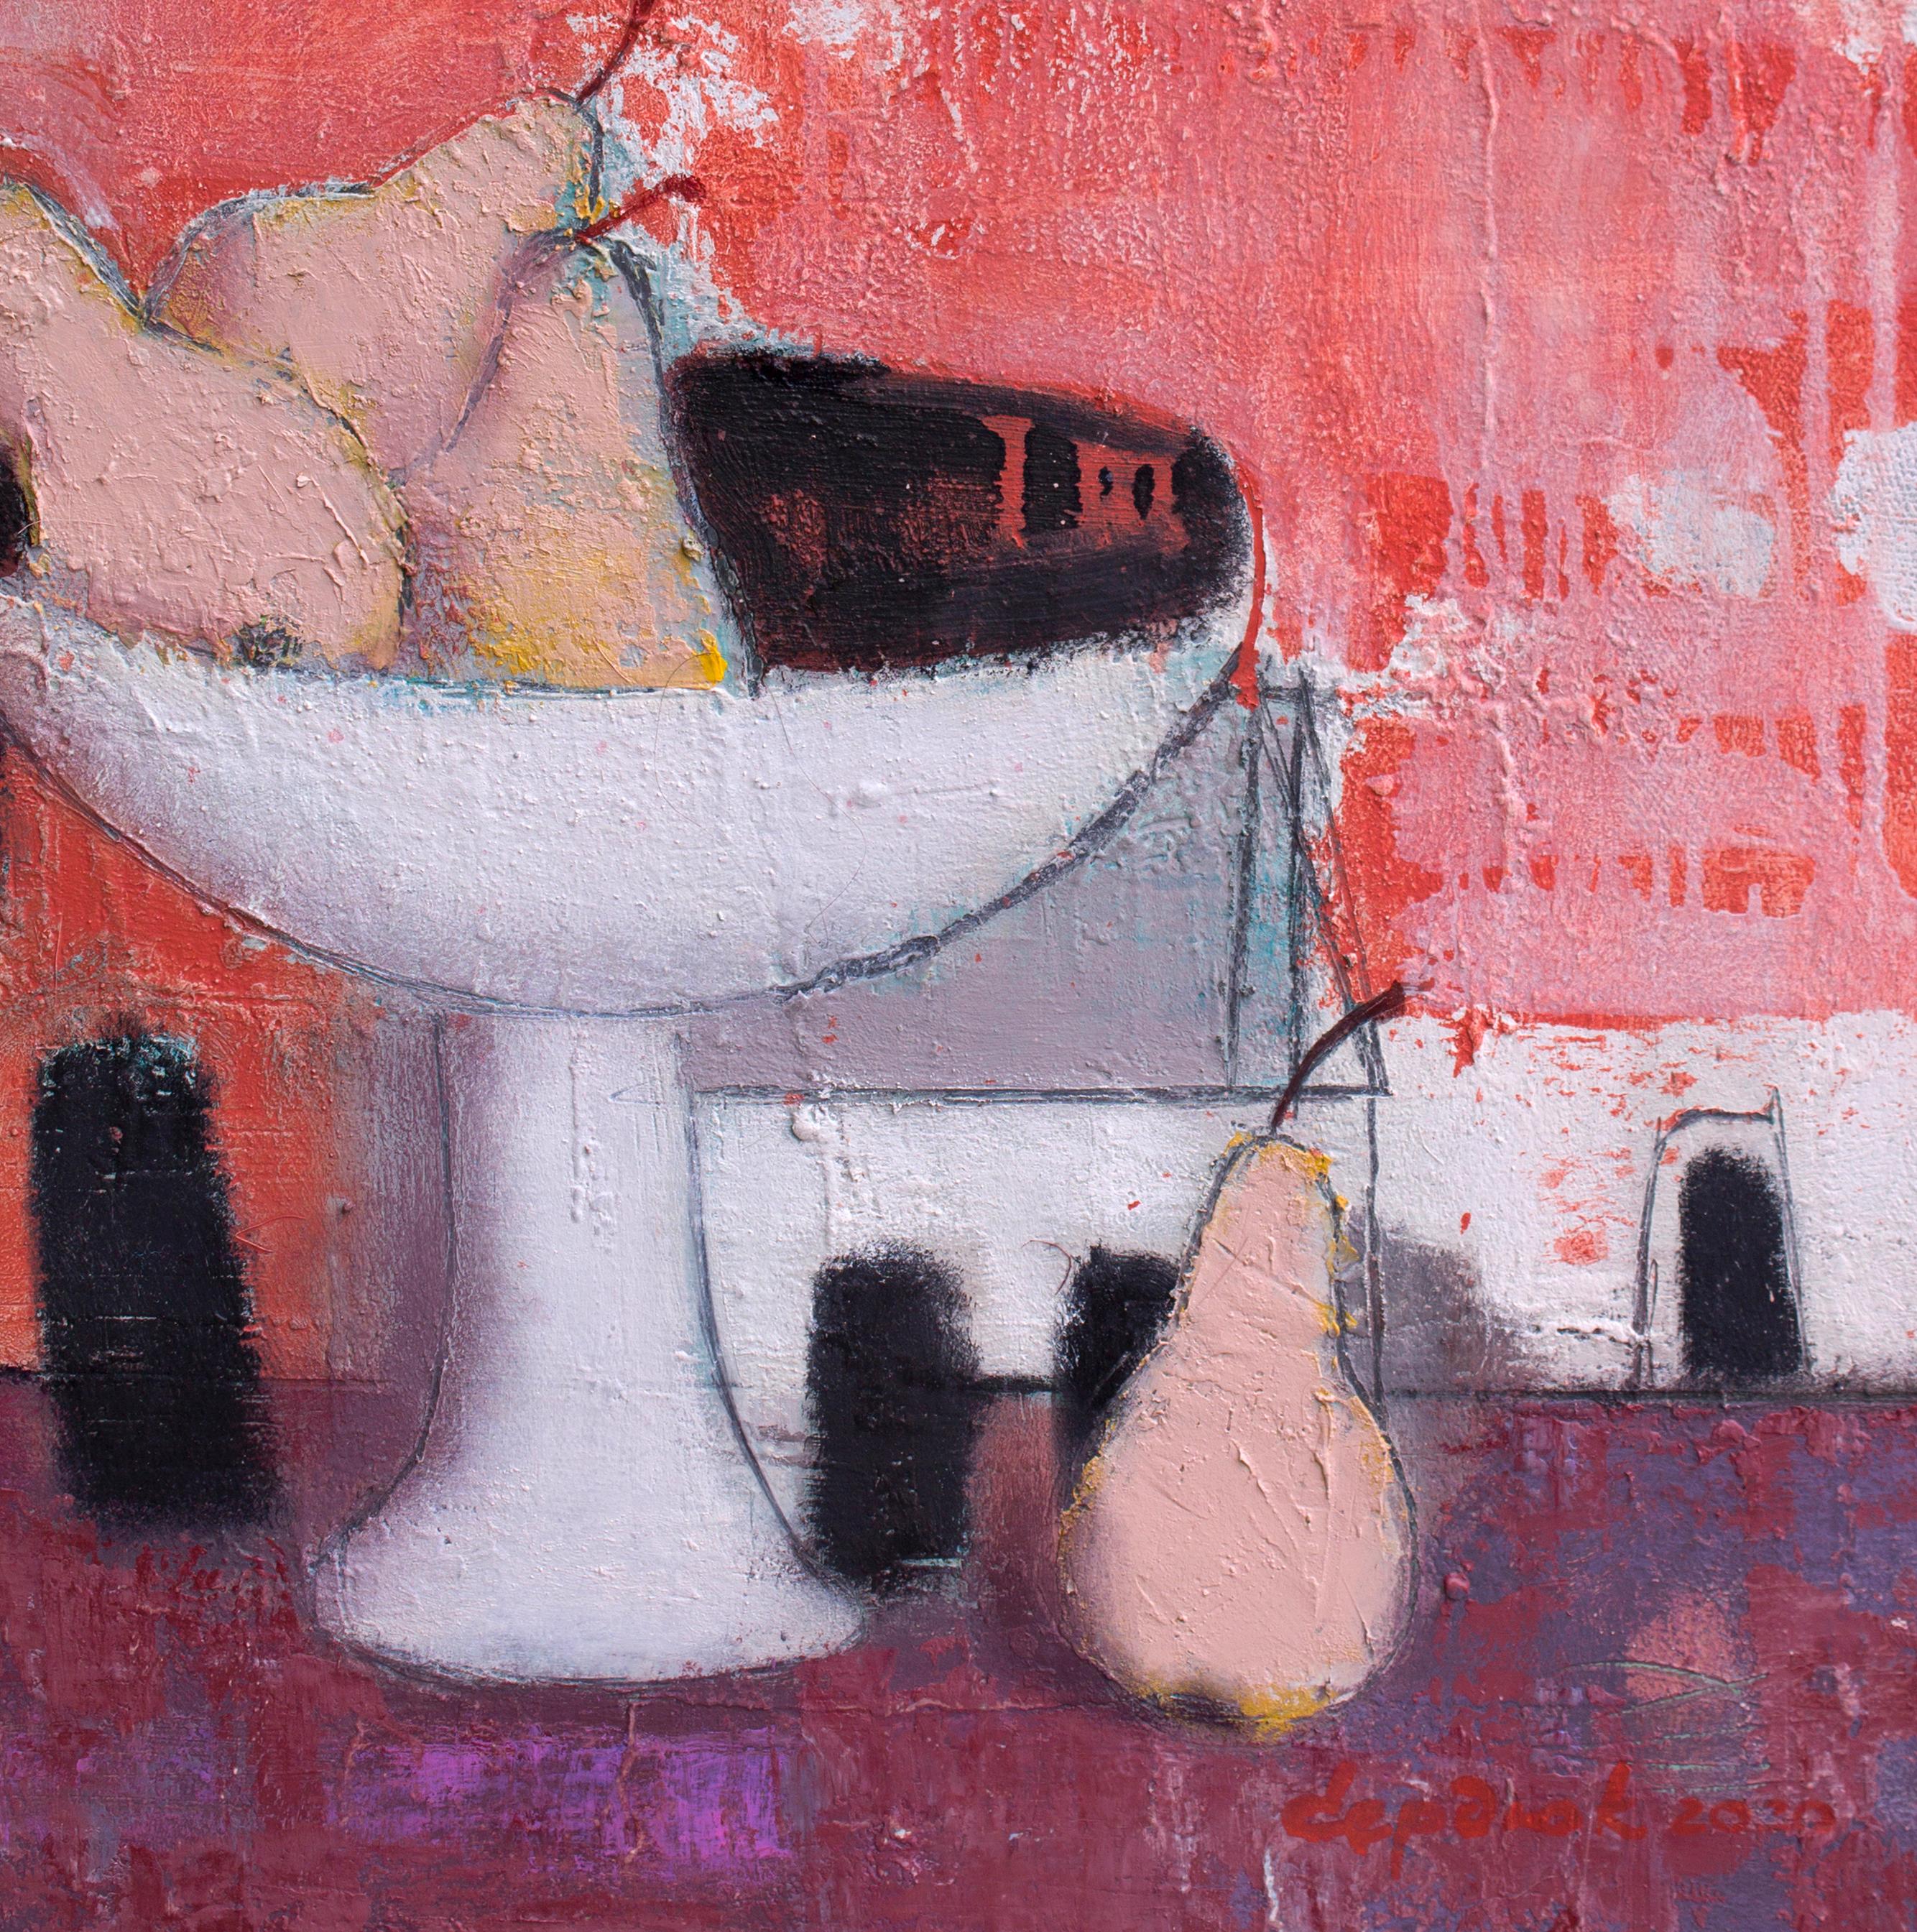  Not Evening Yet - Still Life Painting Colors White Red Blue Pink Pastel Brown 3